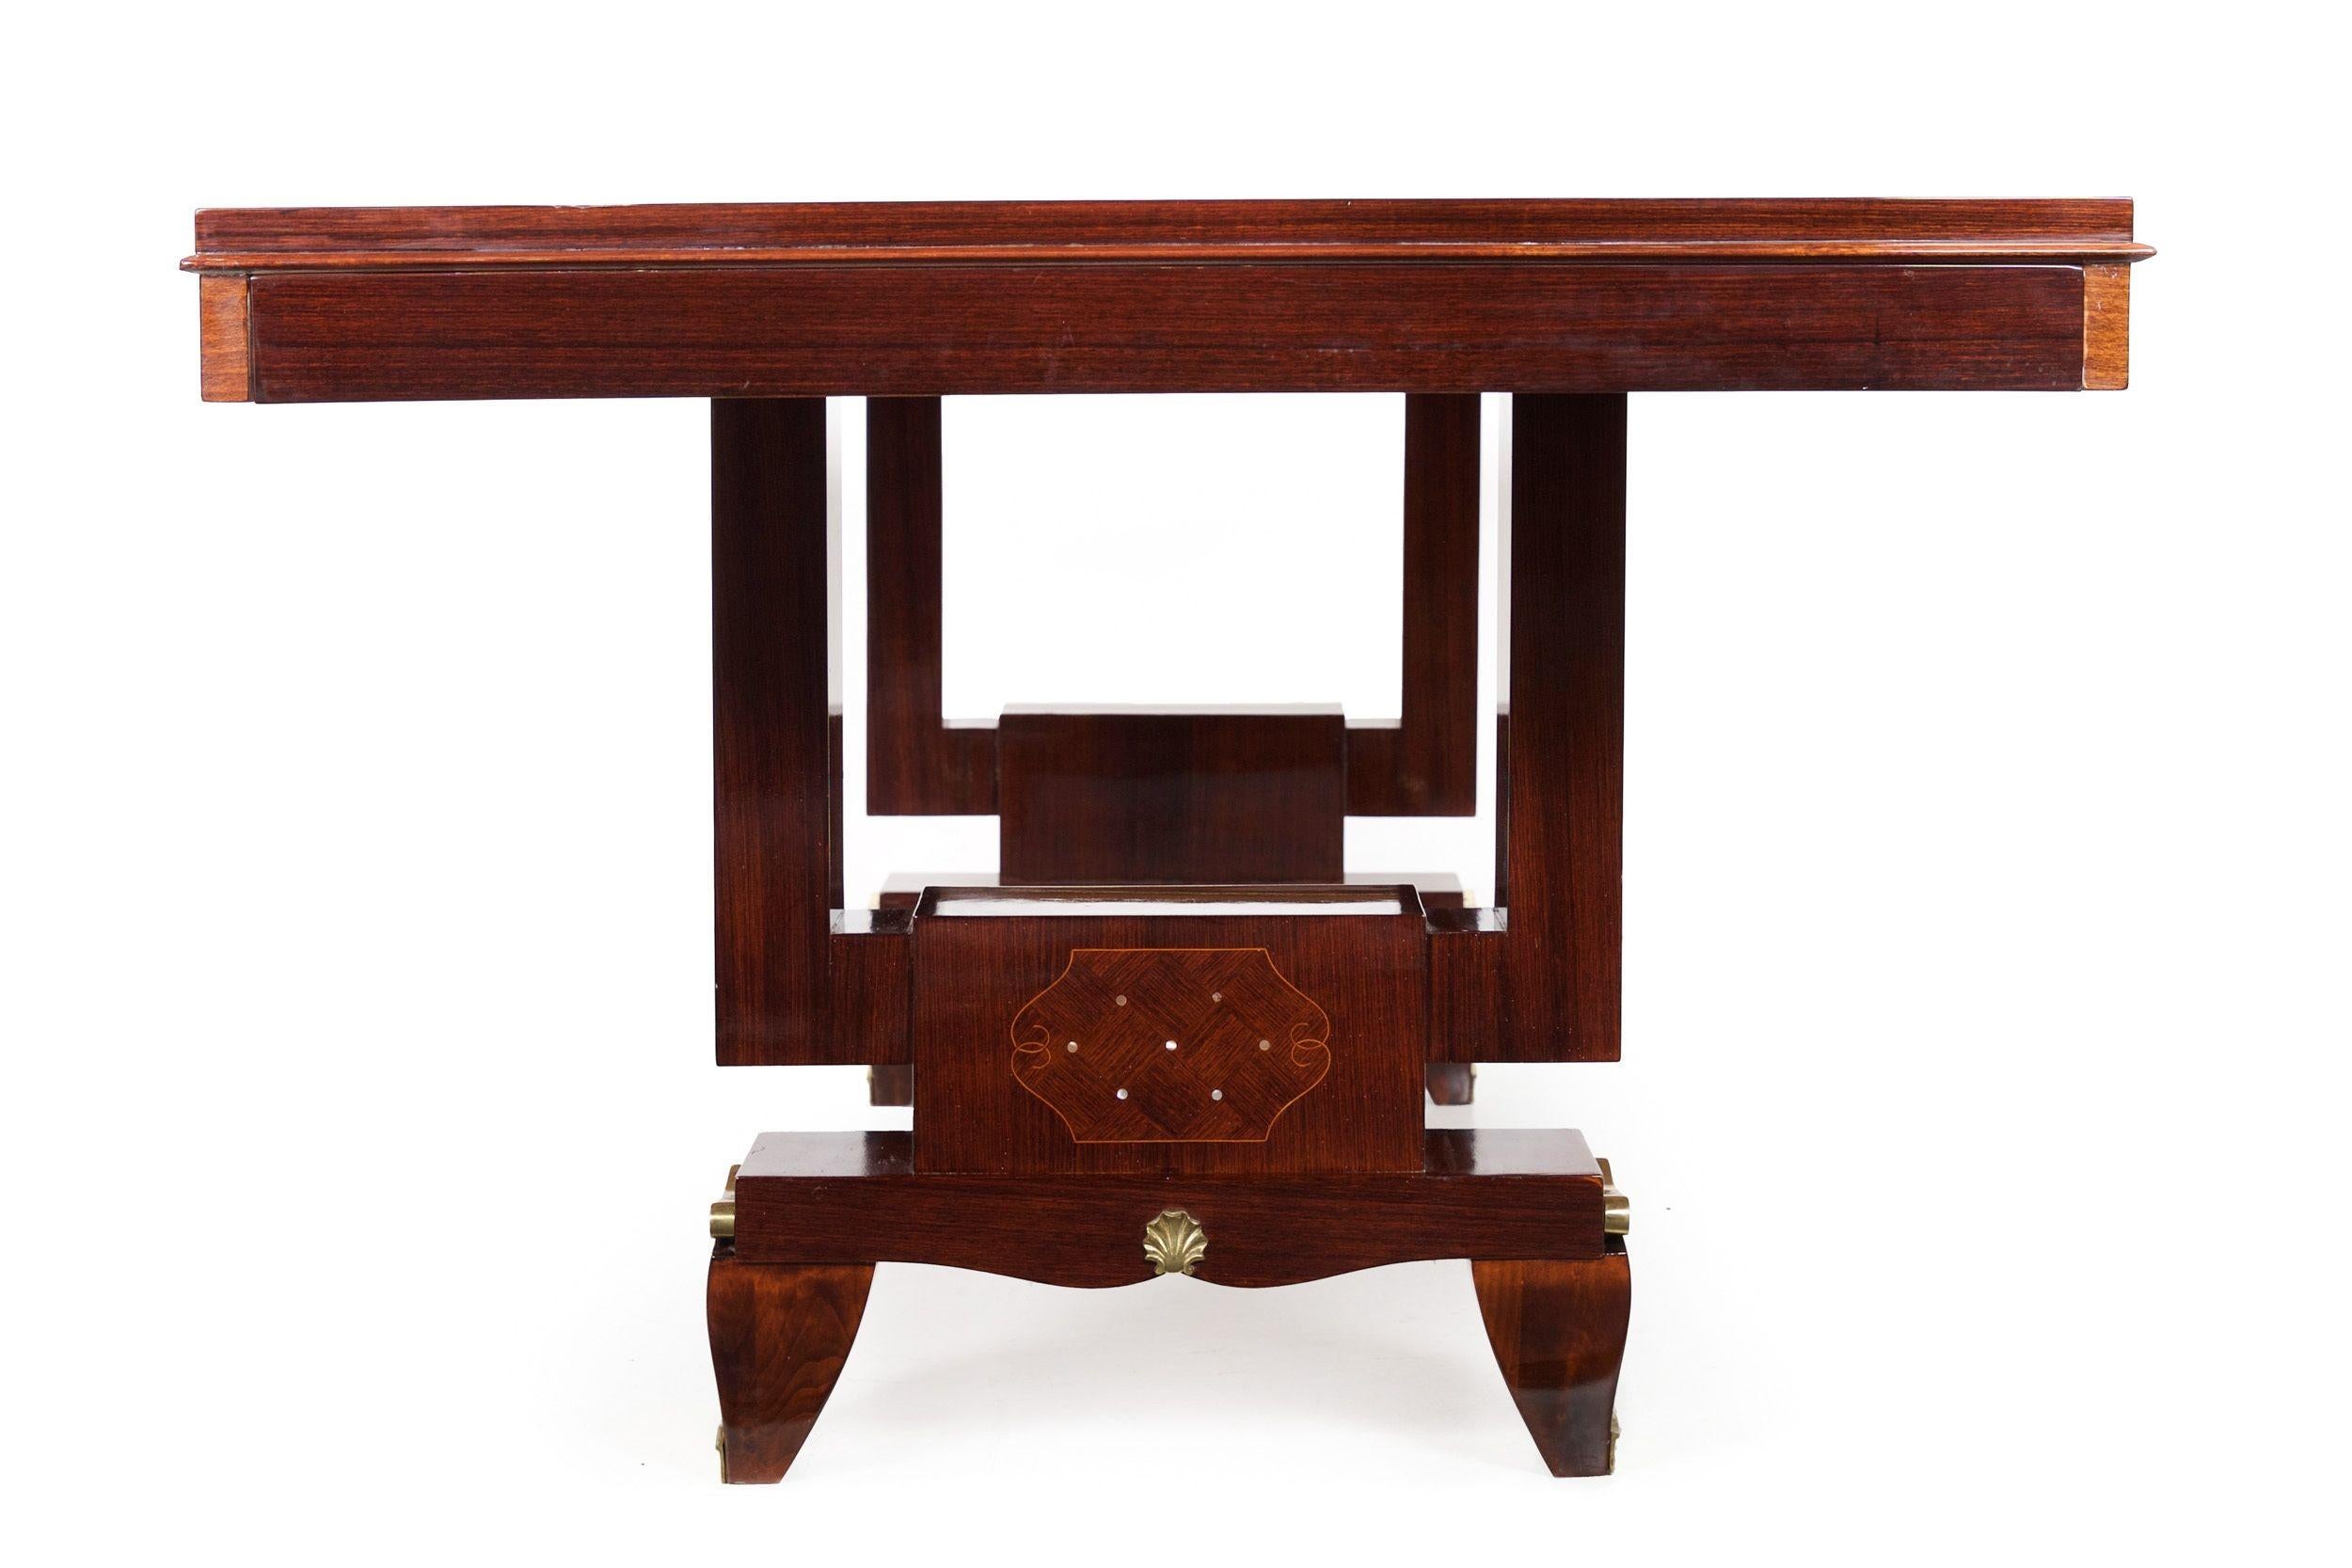 French Art Deco Inlaid Mother-of-Pearl Rosewood Dining Table, circa 1940s For Sale 12